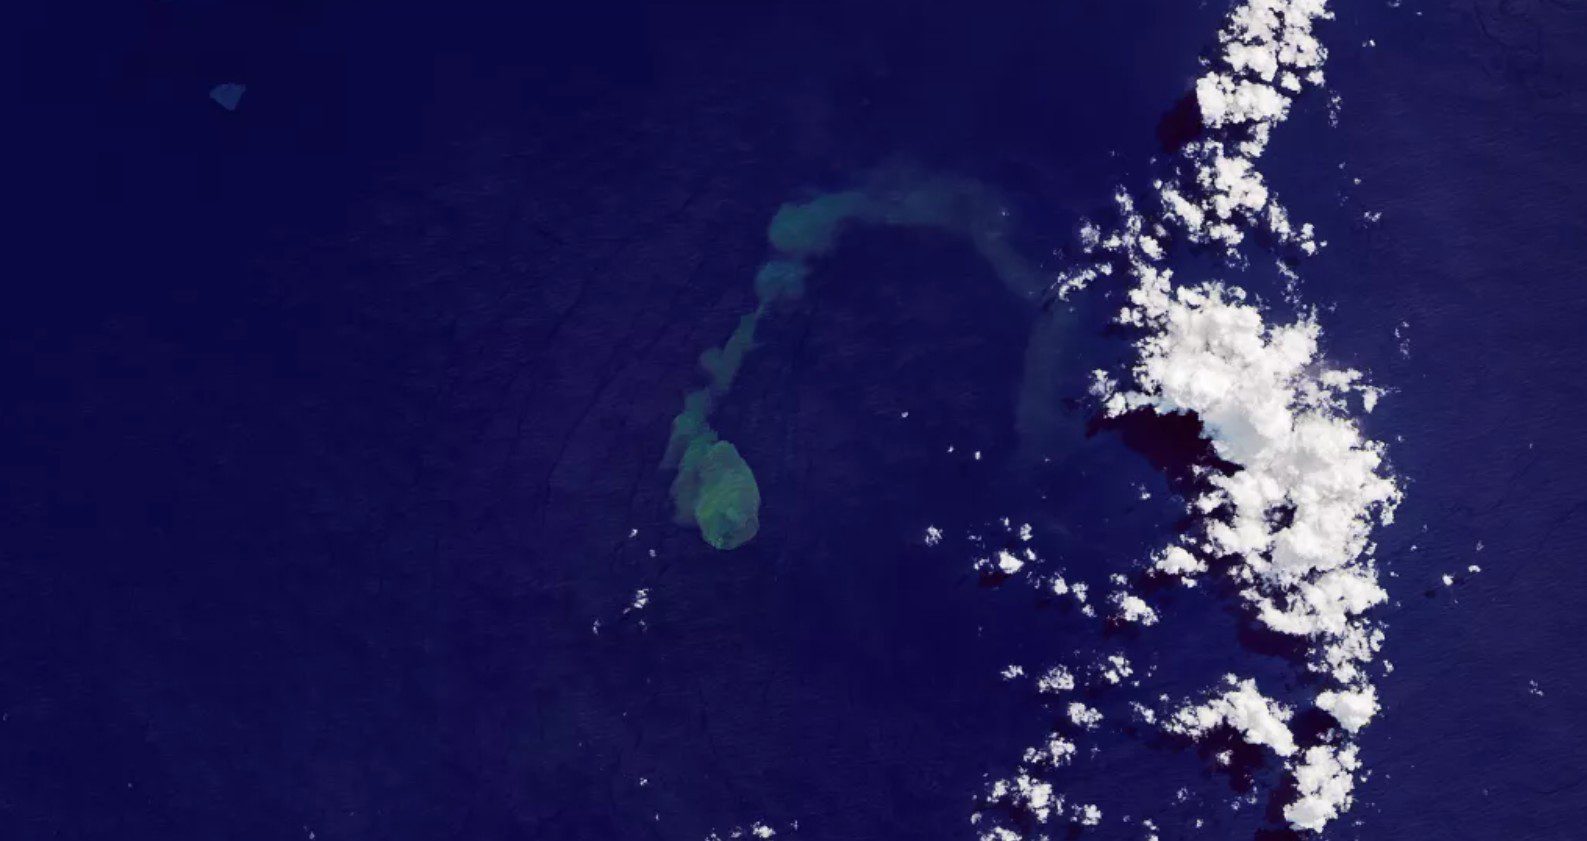 Famous for sharks, an underwater volcano erupts (Photo: Disclosure/NASA)